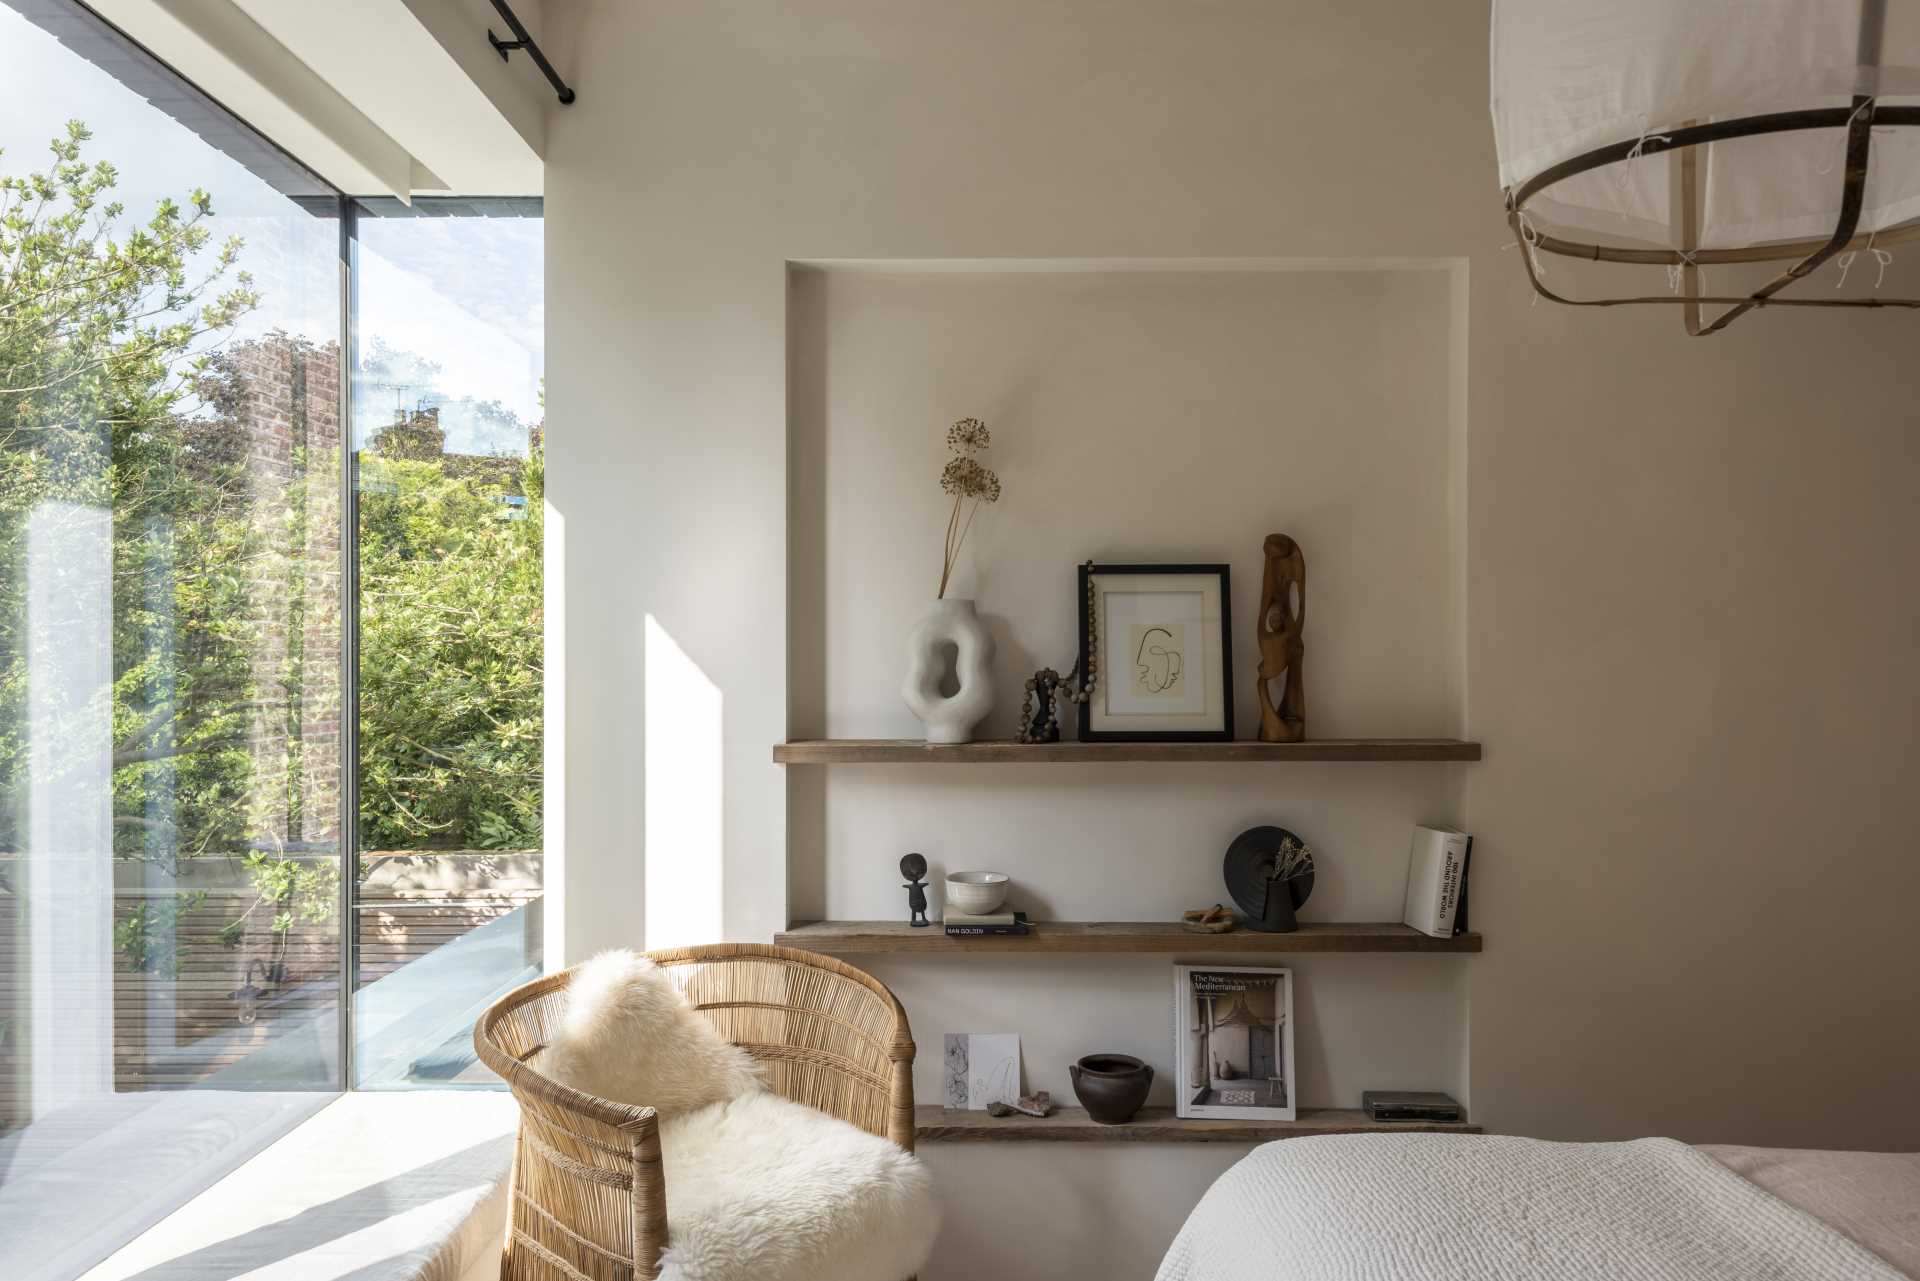 The large floor-to-ceiling windows provide this modern bedroom with a view of the garden.